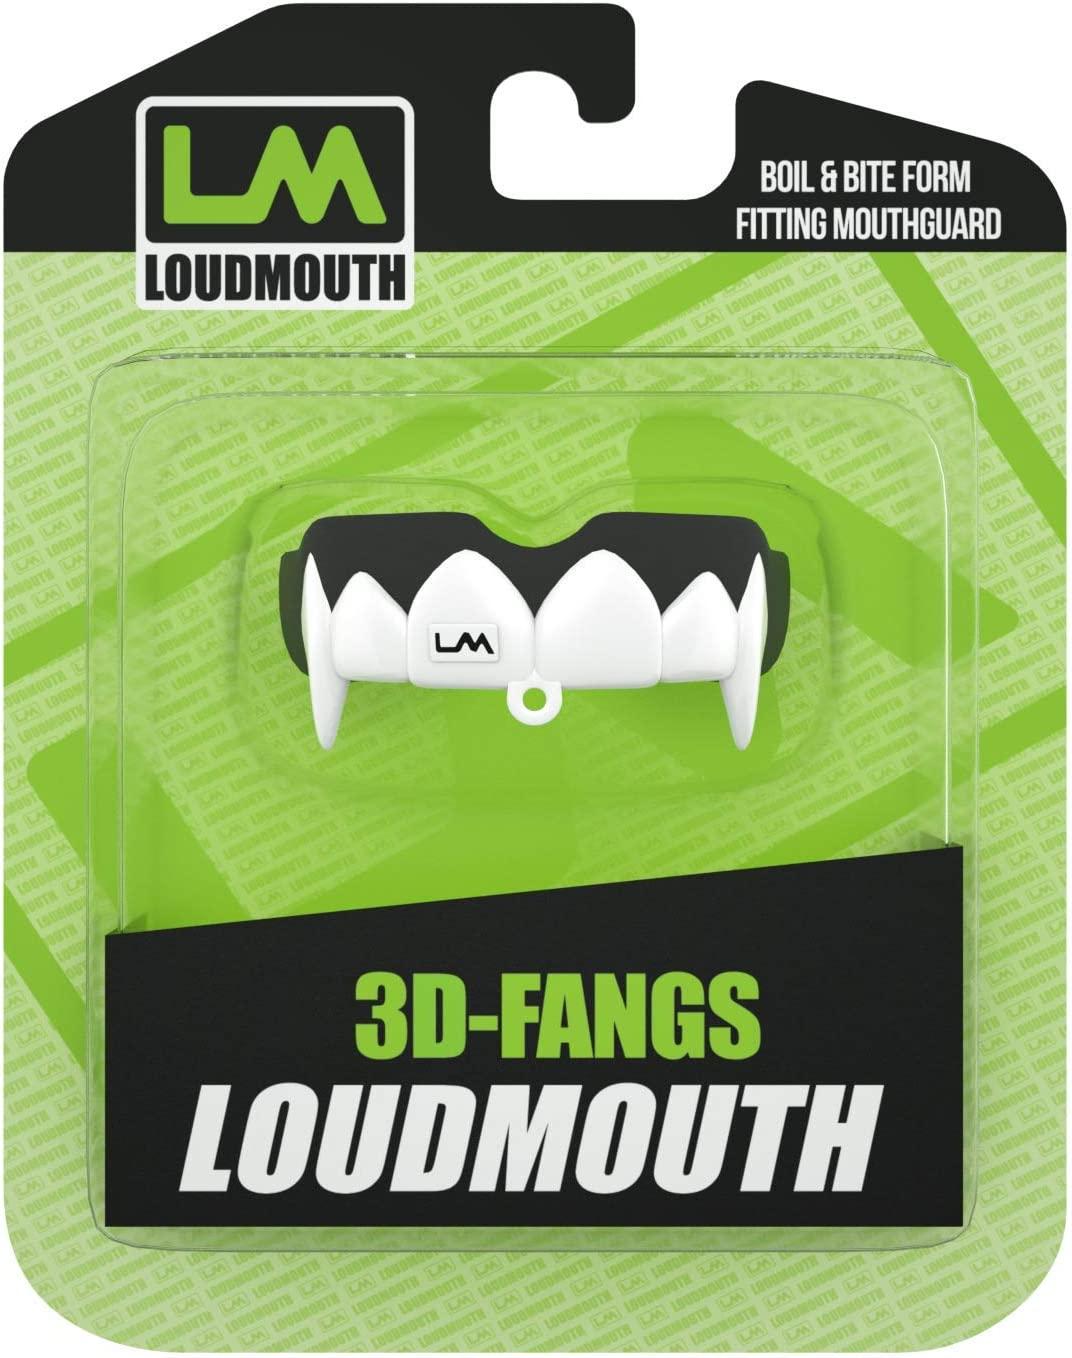 Custom Mouthguards for Football, Boxing, MMA & More